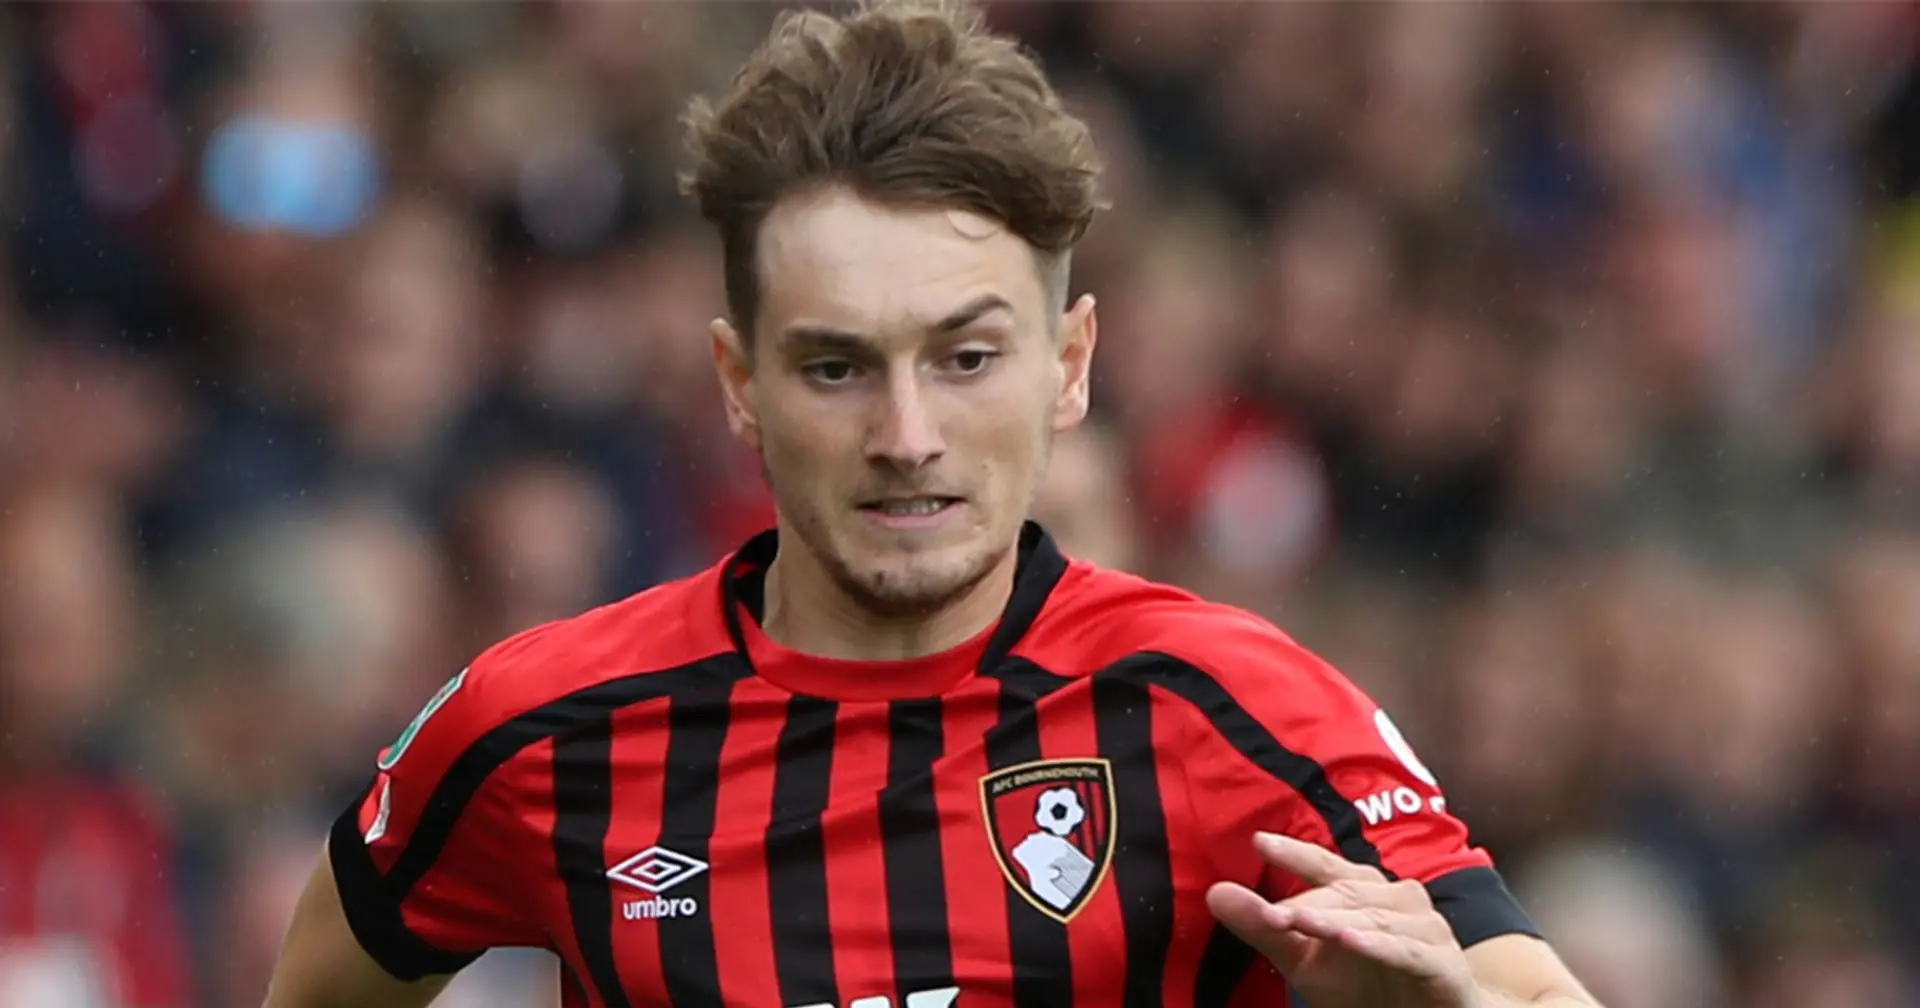 Bournemouth midfielder David Brooks diagnosed with cancer